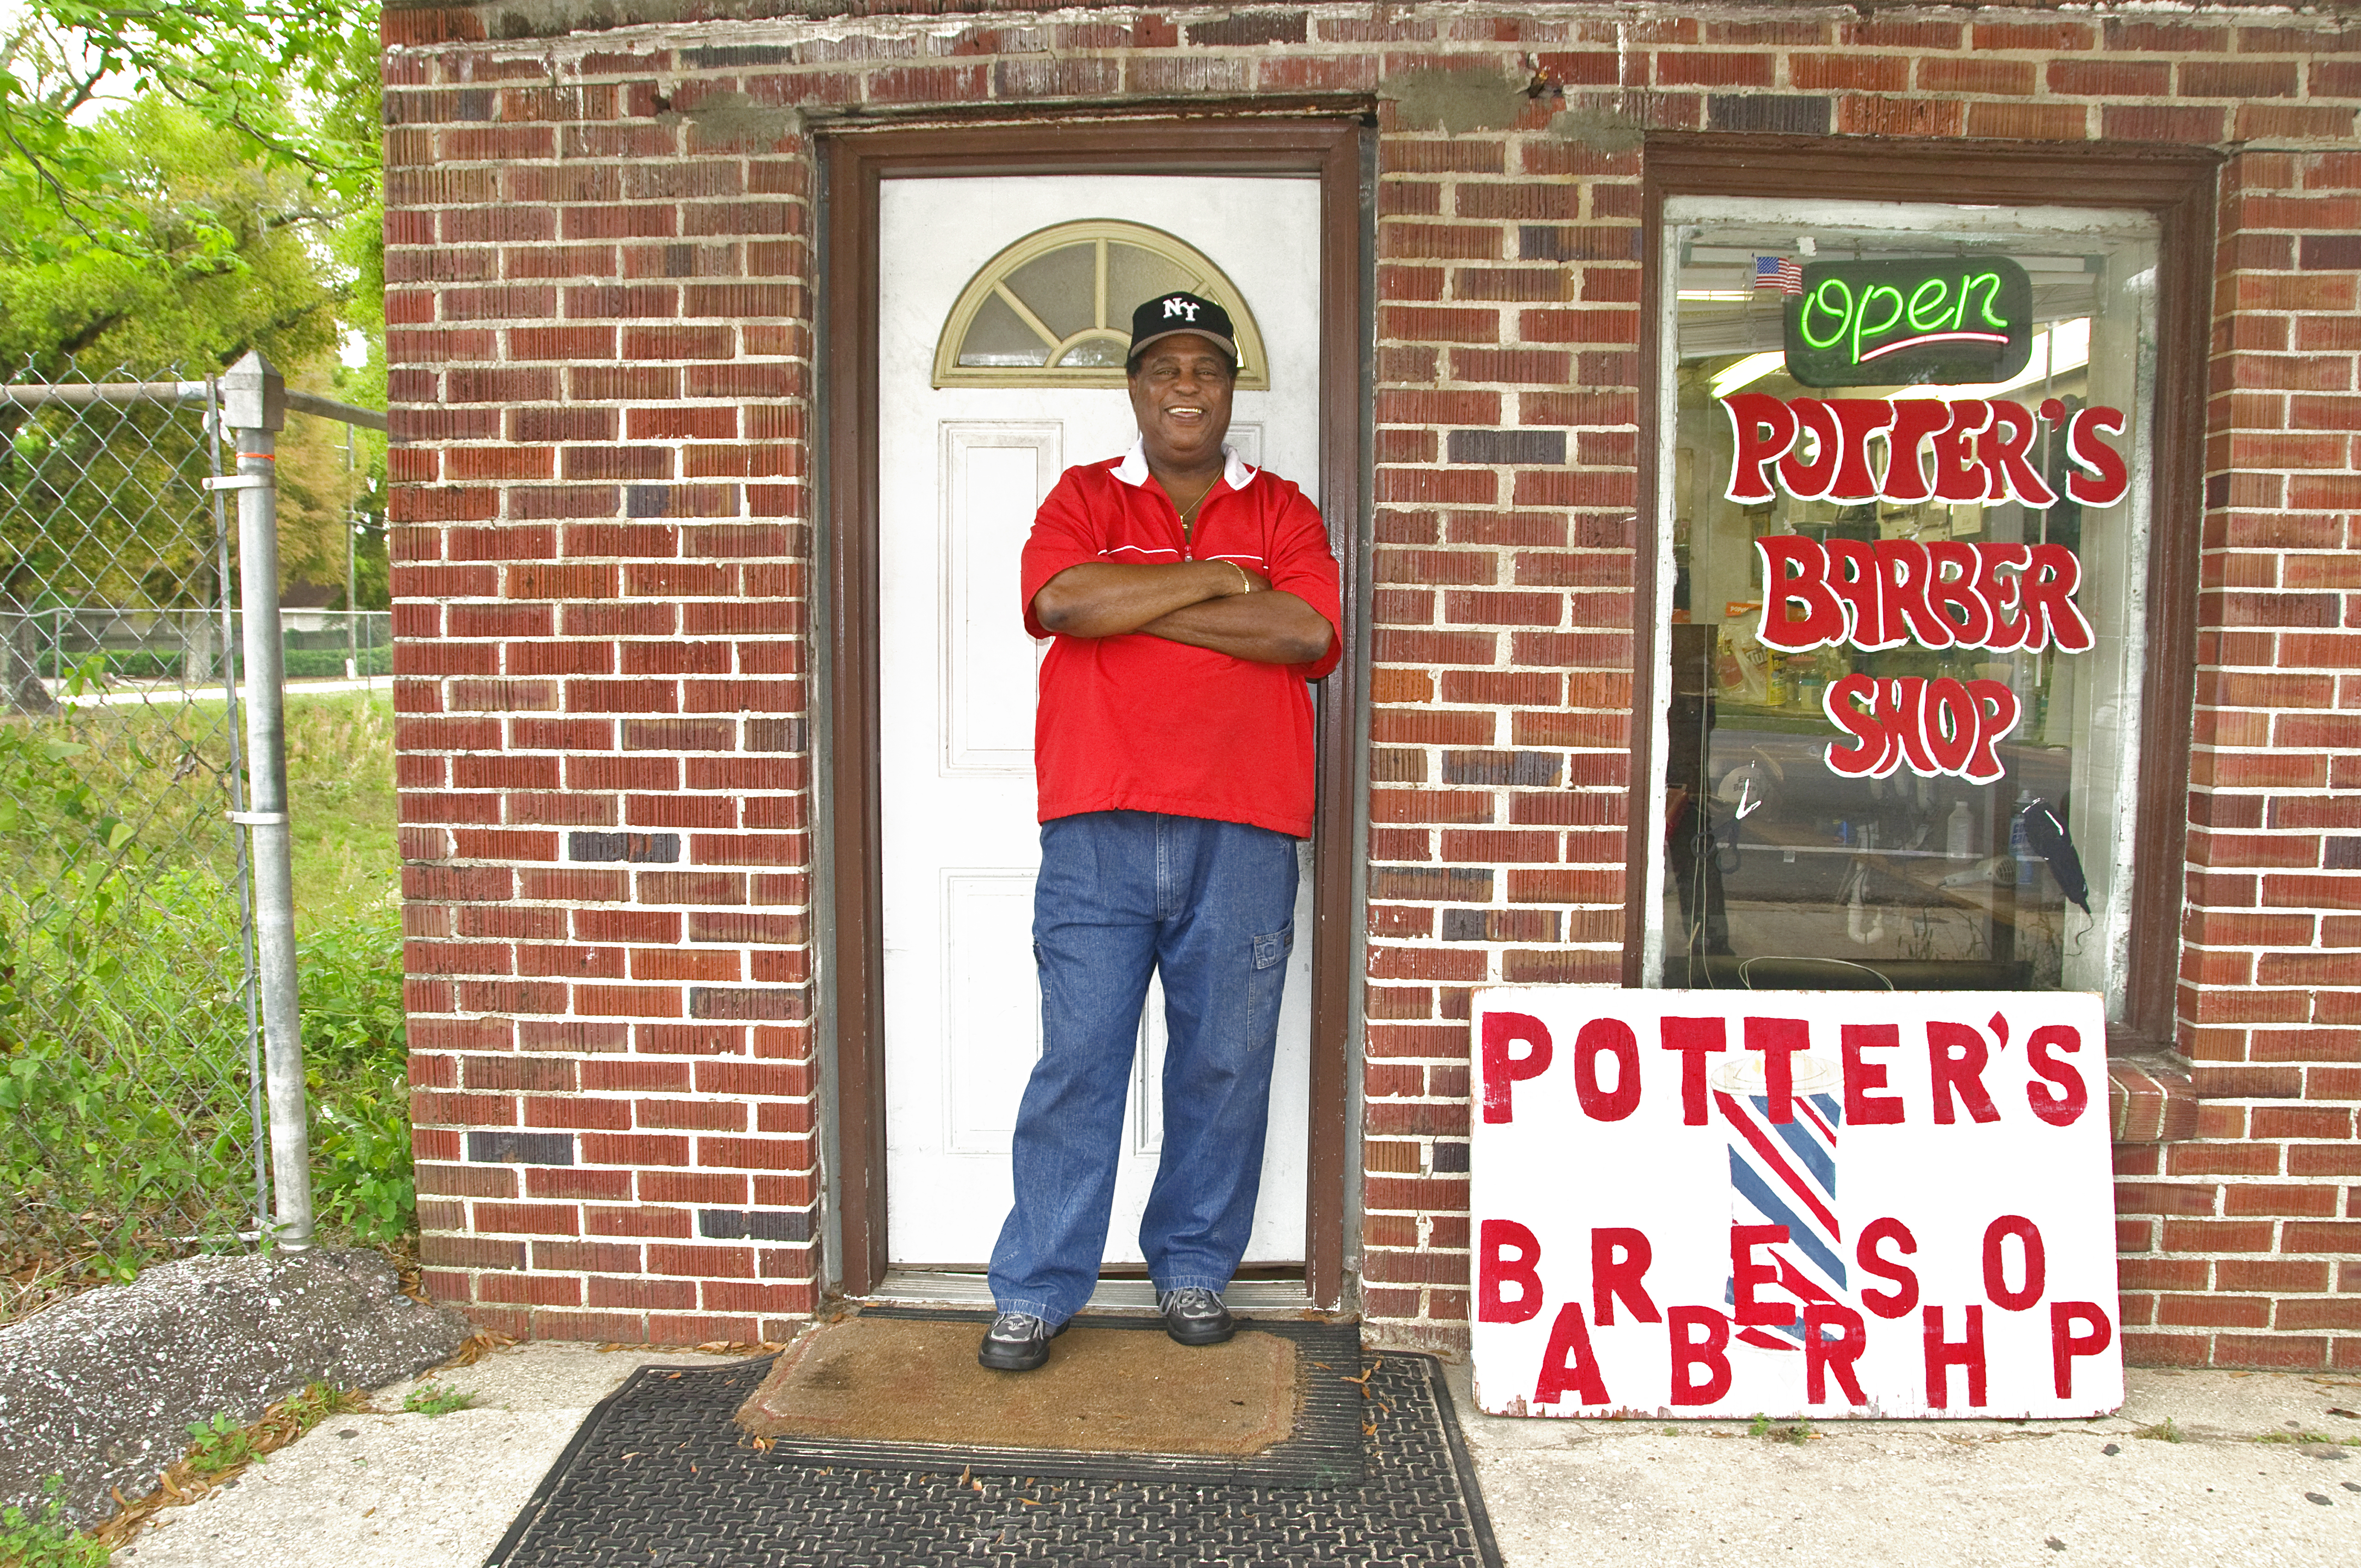 Barbershop owner in front of his own Barber Shop in Pensacola, Florida, USA